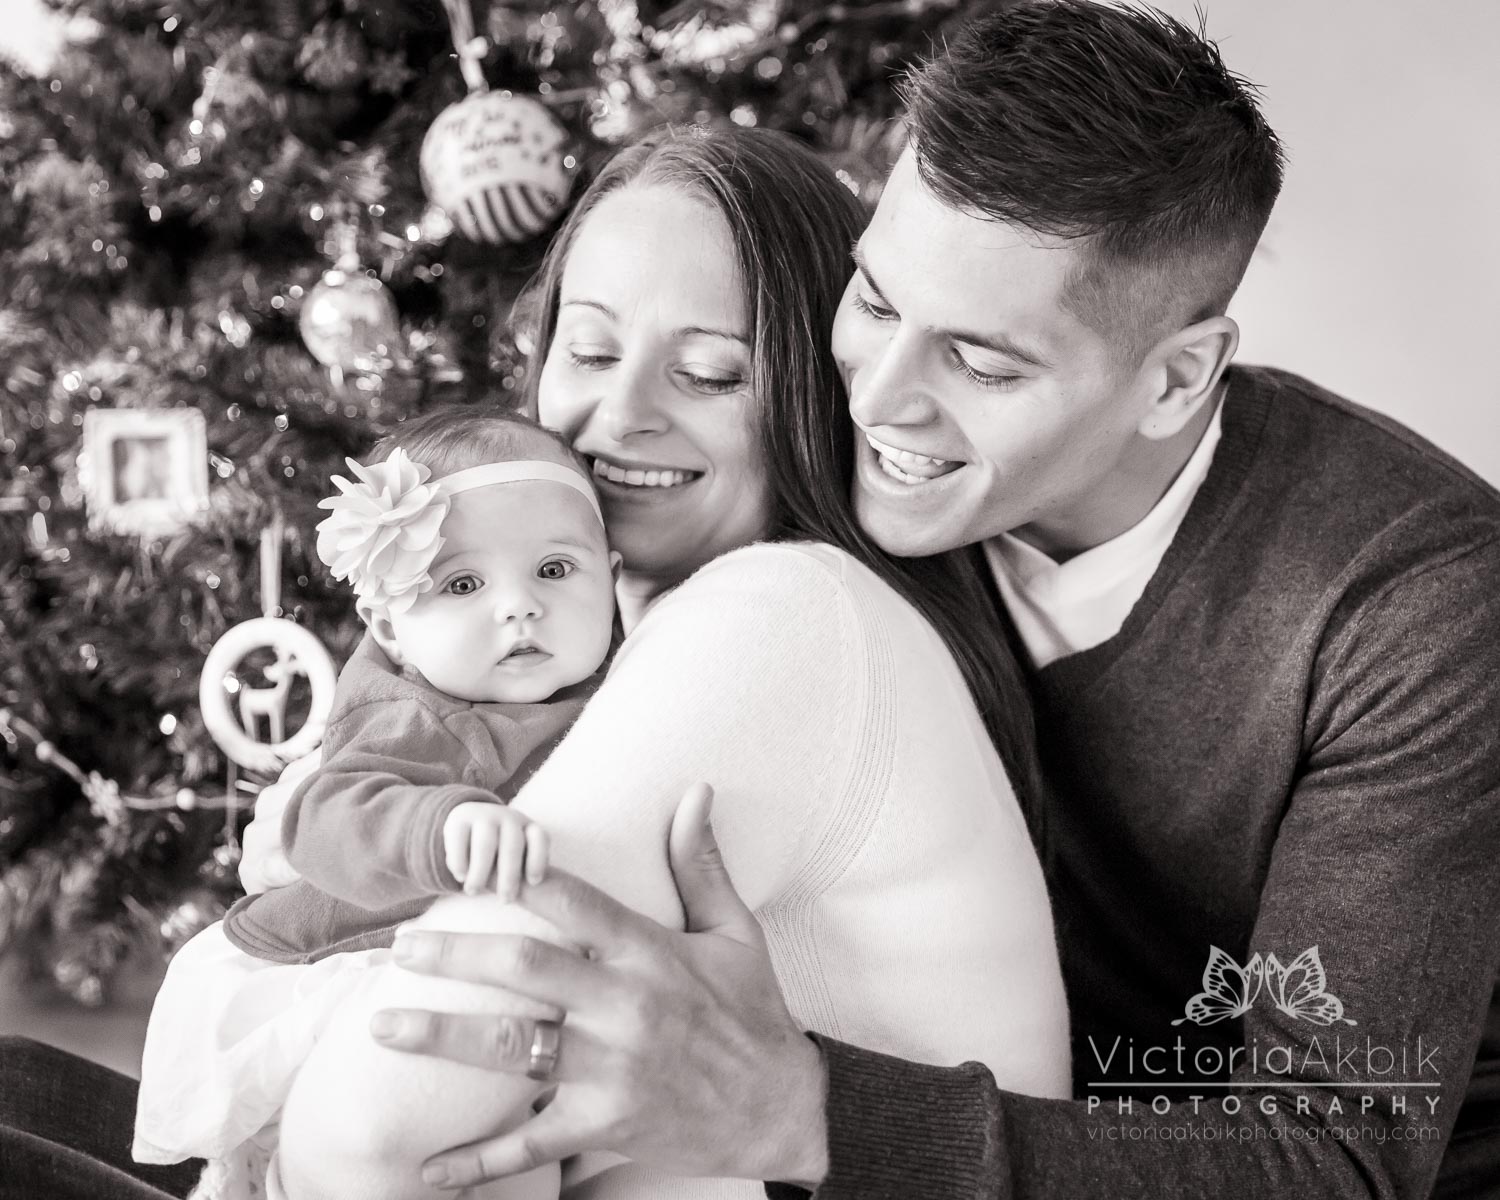 Baby's first Christmas At-Home Session | Abu Dhabi Lifestyle Family Photography » Victoria Akbik Photography